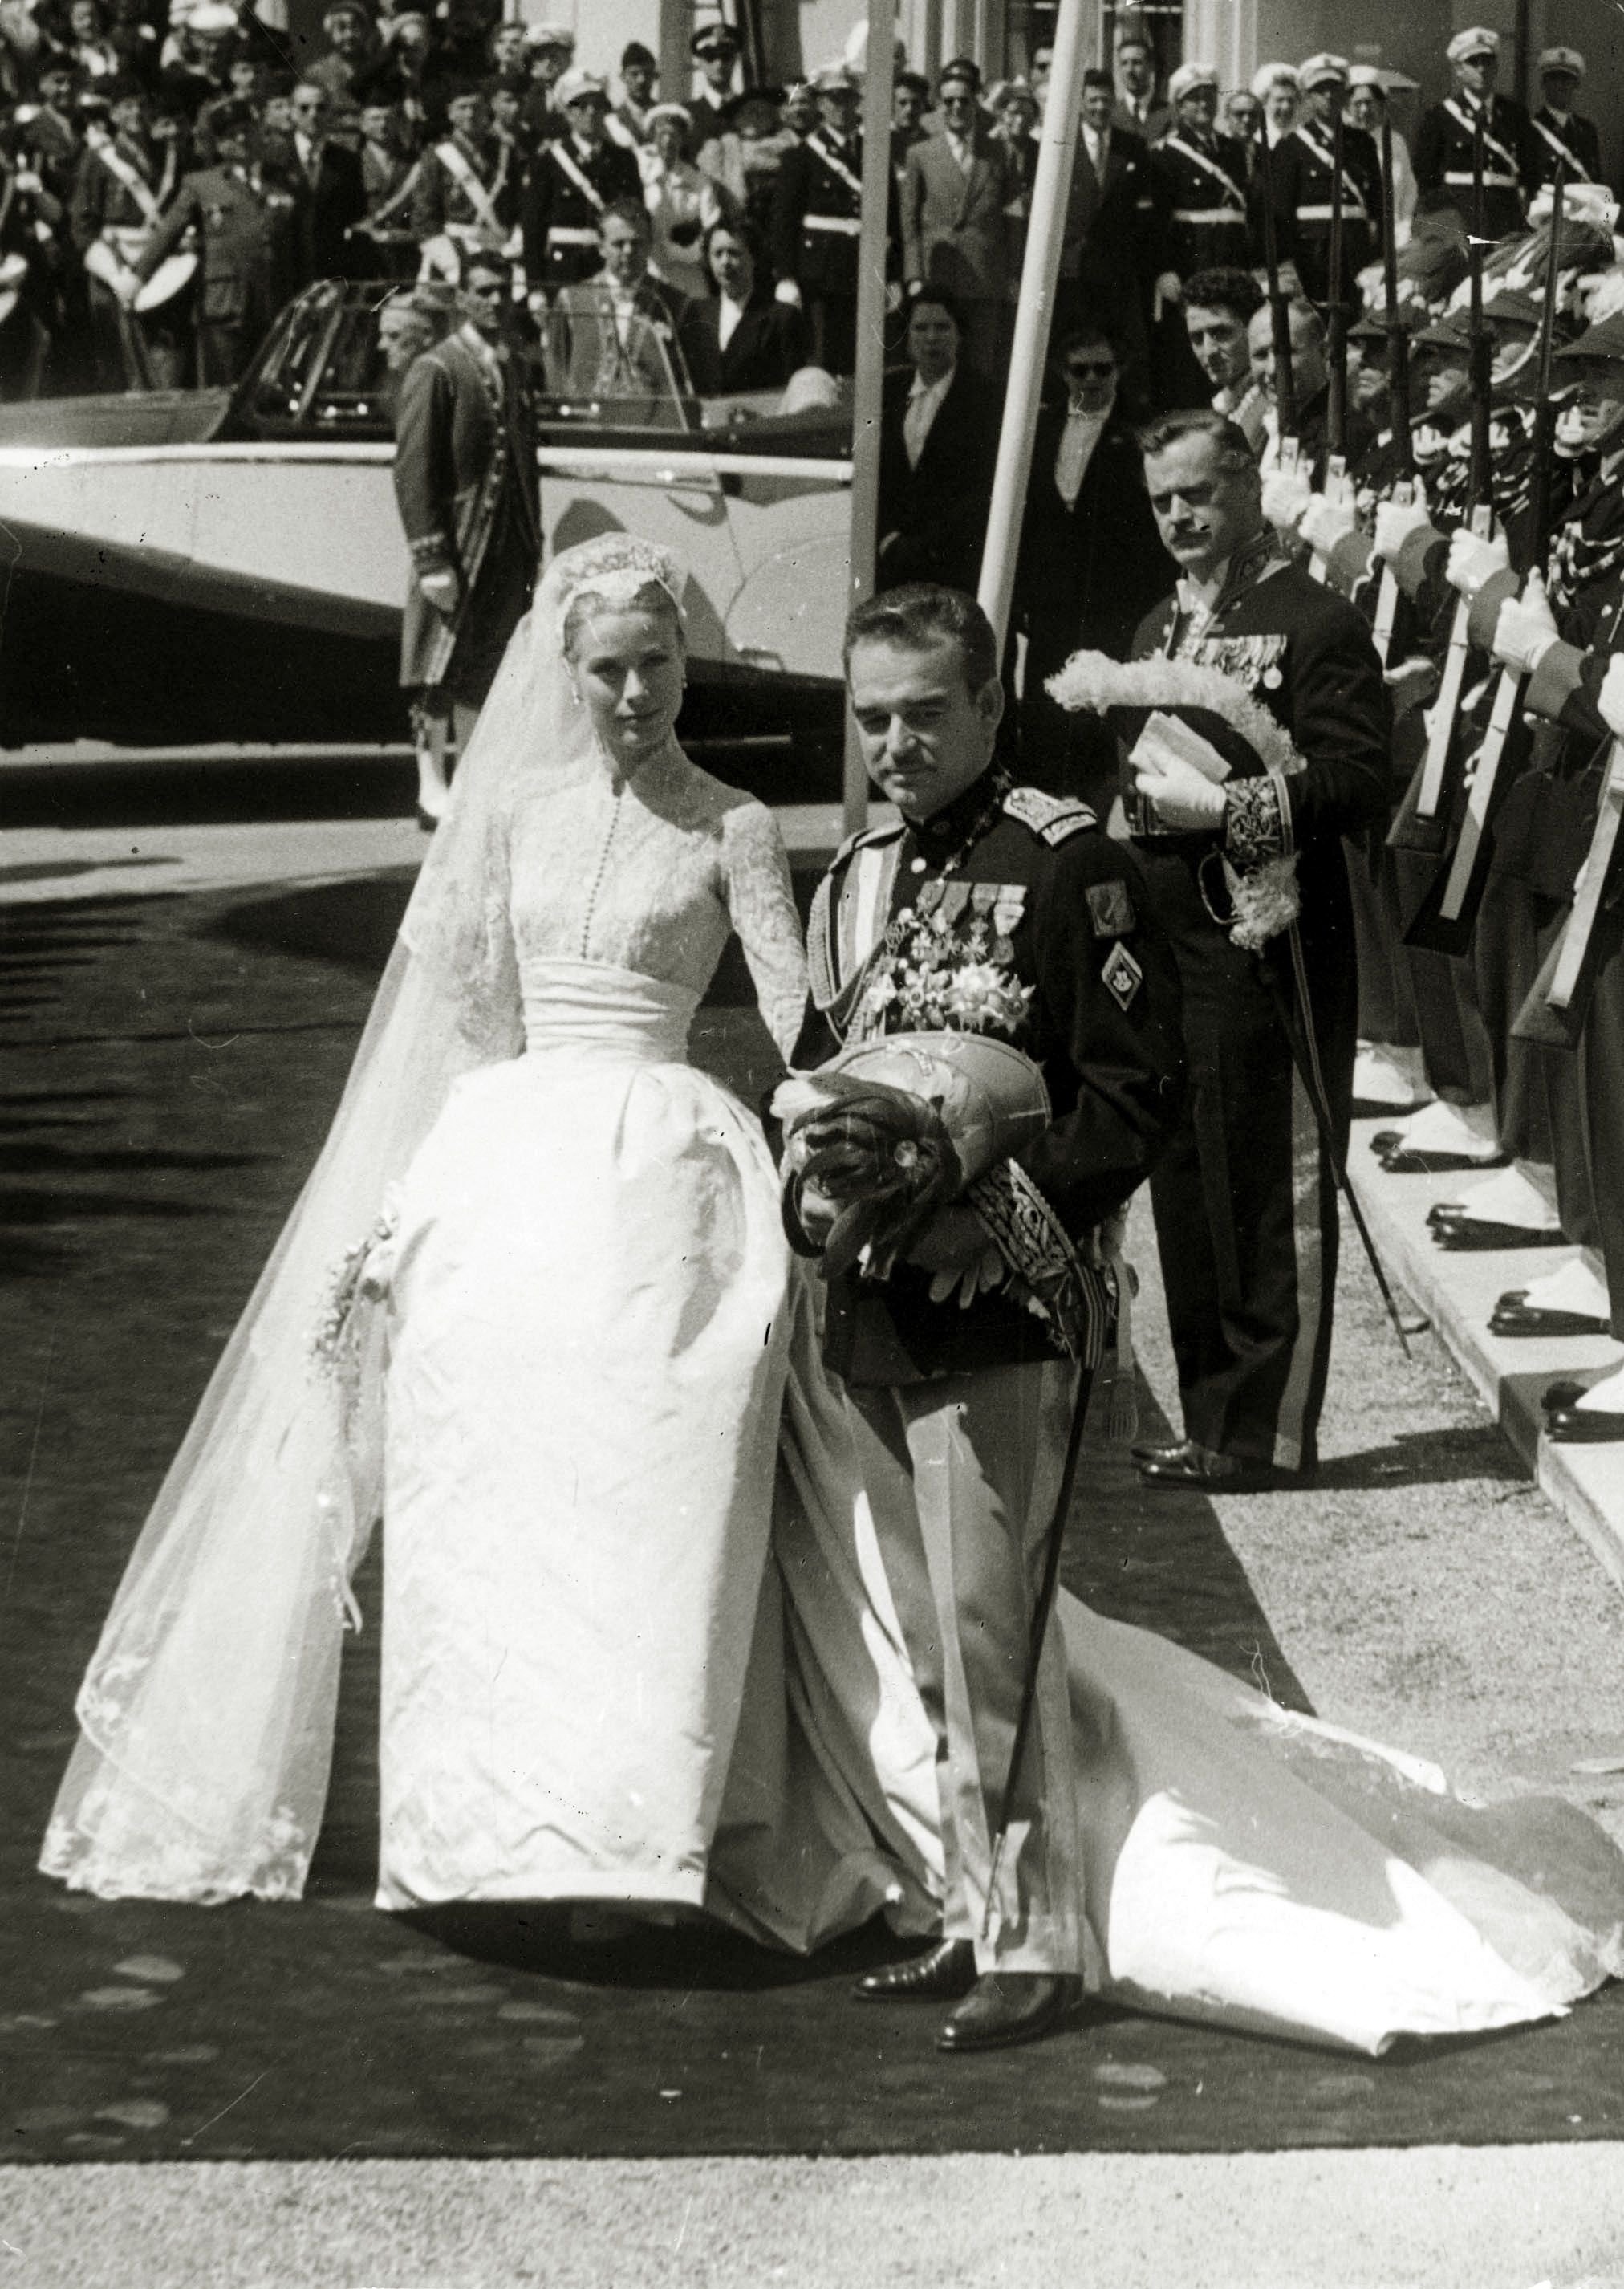 Prince Rainier III and Princess Grace Kelly of Monaco during their wedding, 20th century. | Source: Getty Images